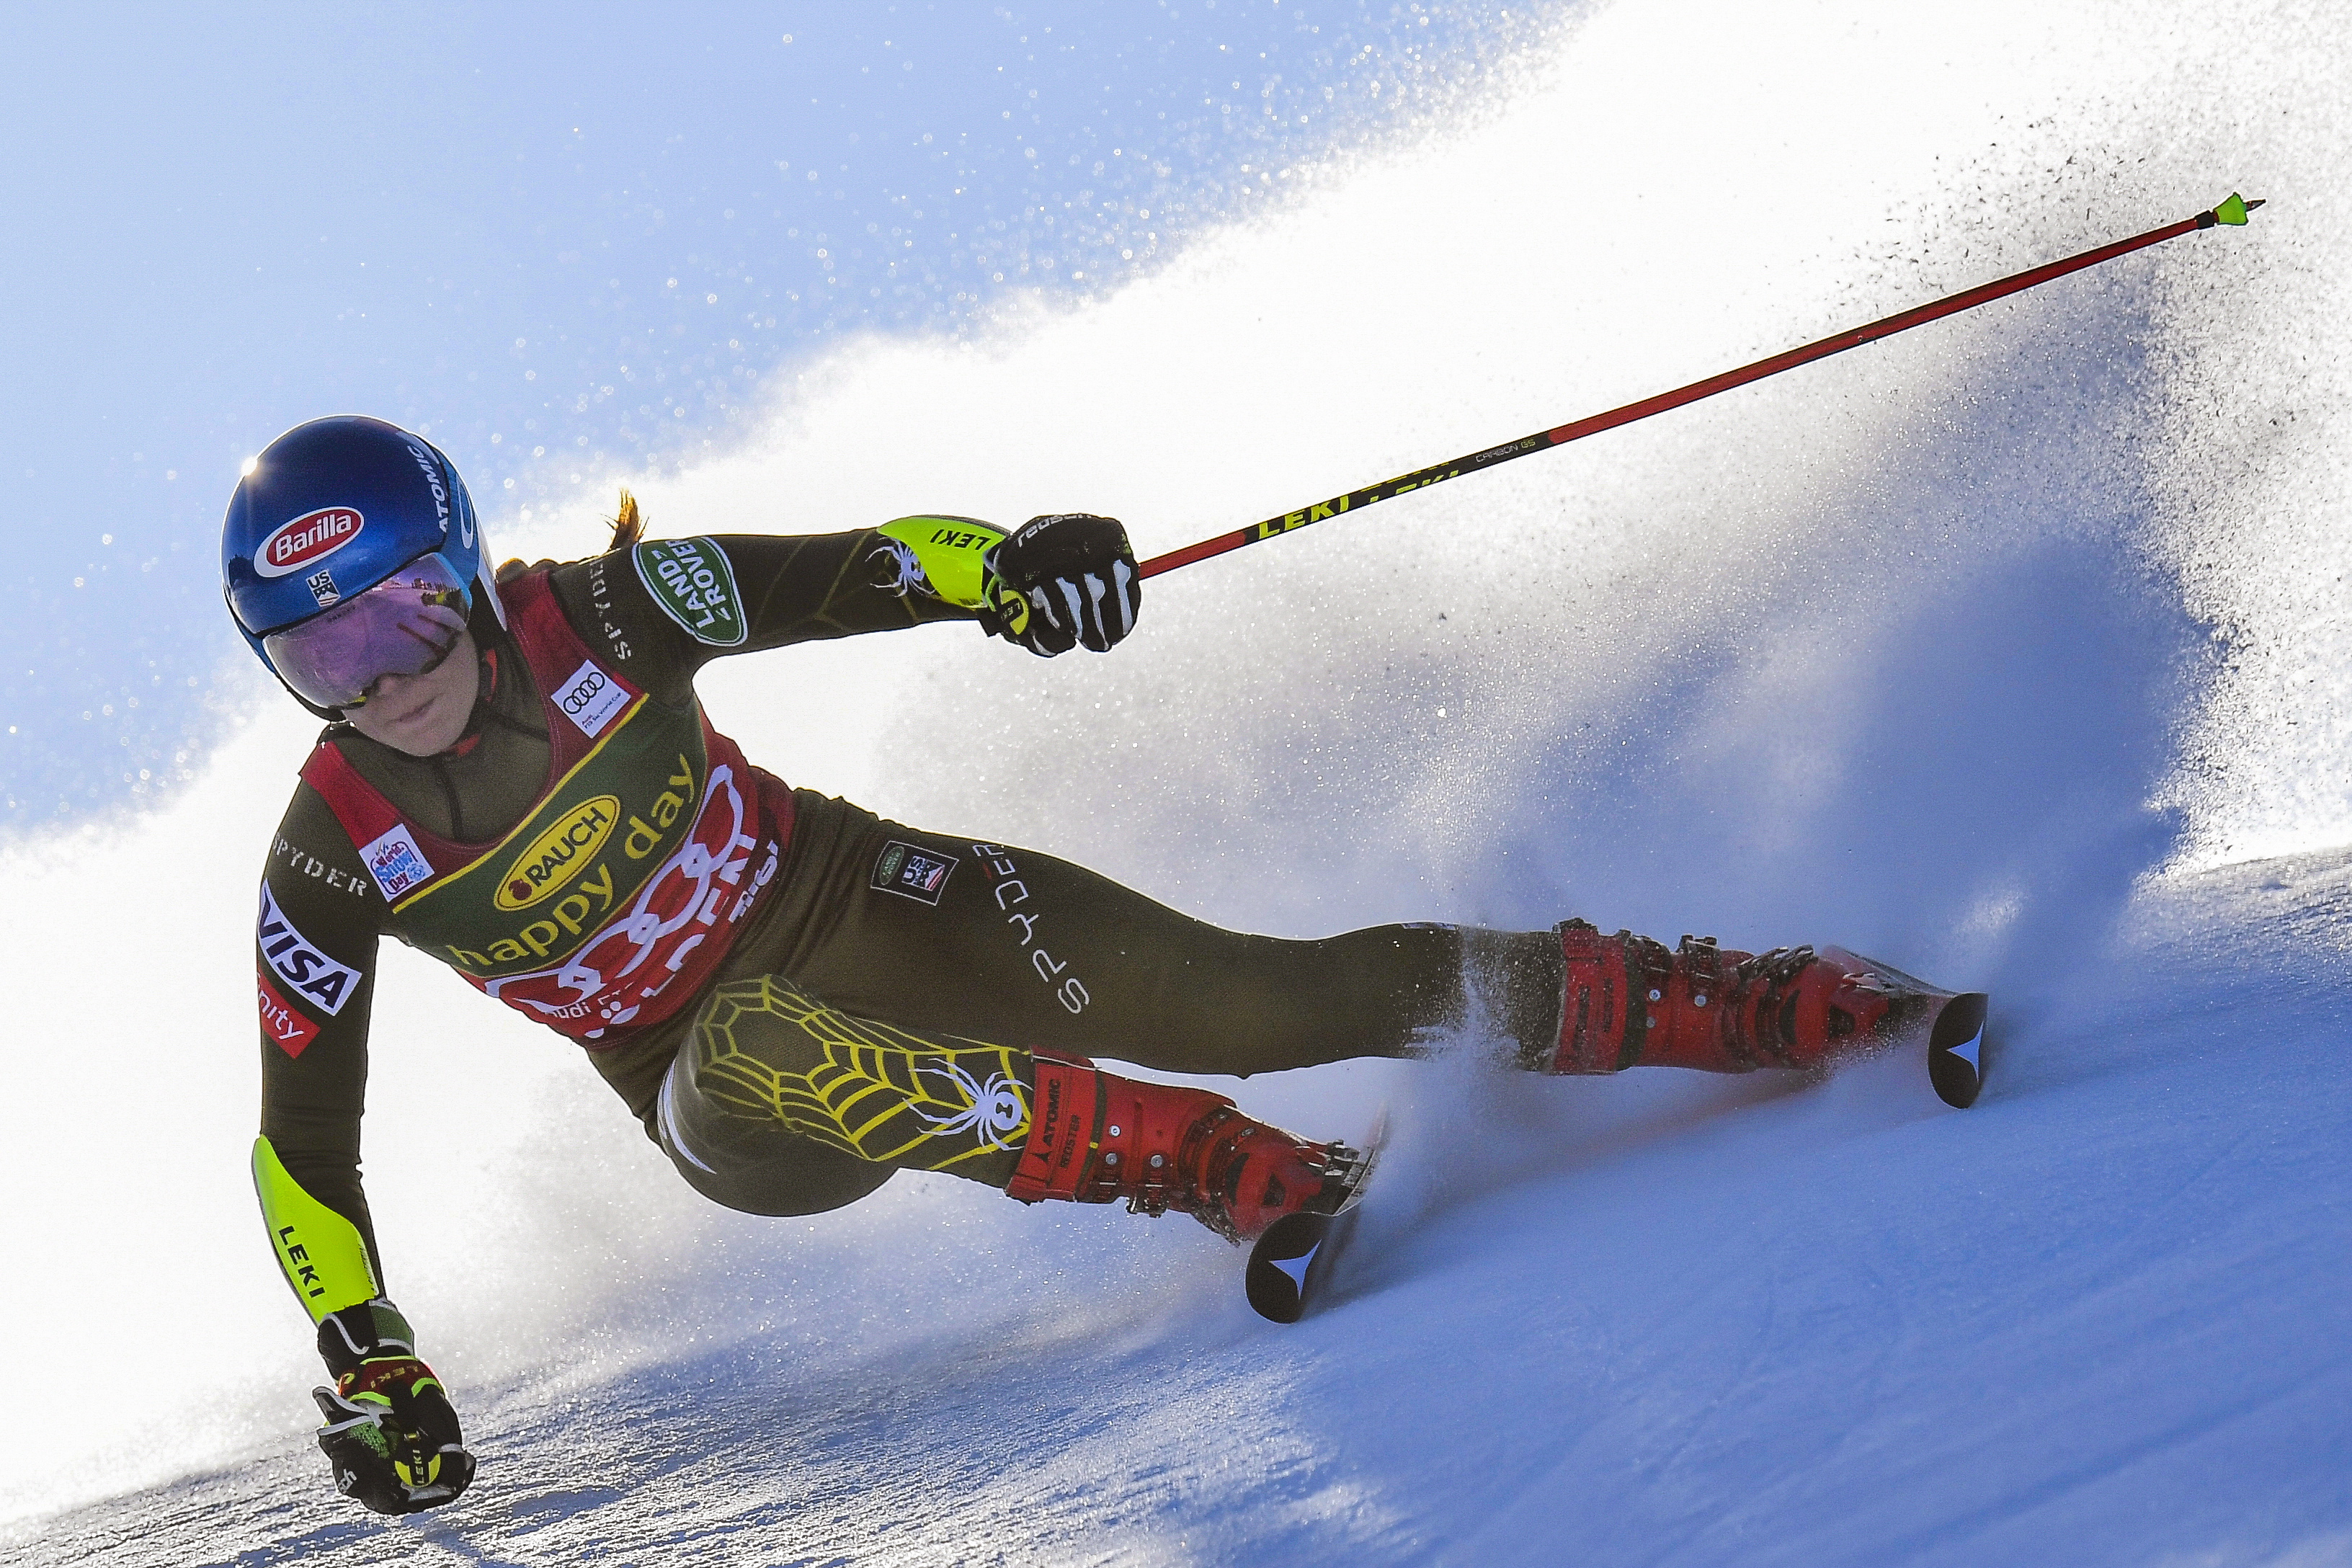 epa07950546 Mikaela Shiffrin of the USA in action during the first run of the women's Giant Slalom race of the FIS Alpine Skiing World Cup season opener on the Rettenbach glacier in Soelden, Austria, 26 October 2019.  EPA/GIAN EHRENZELLER